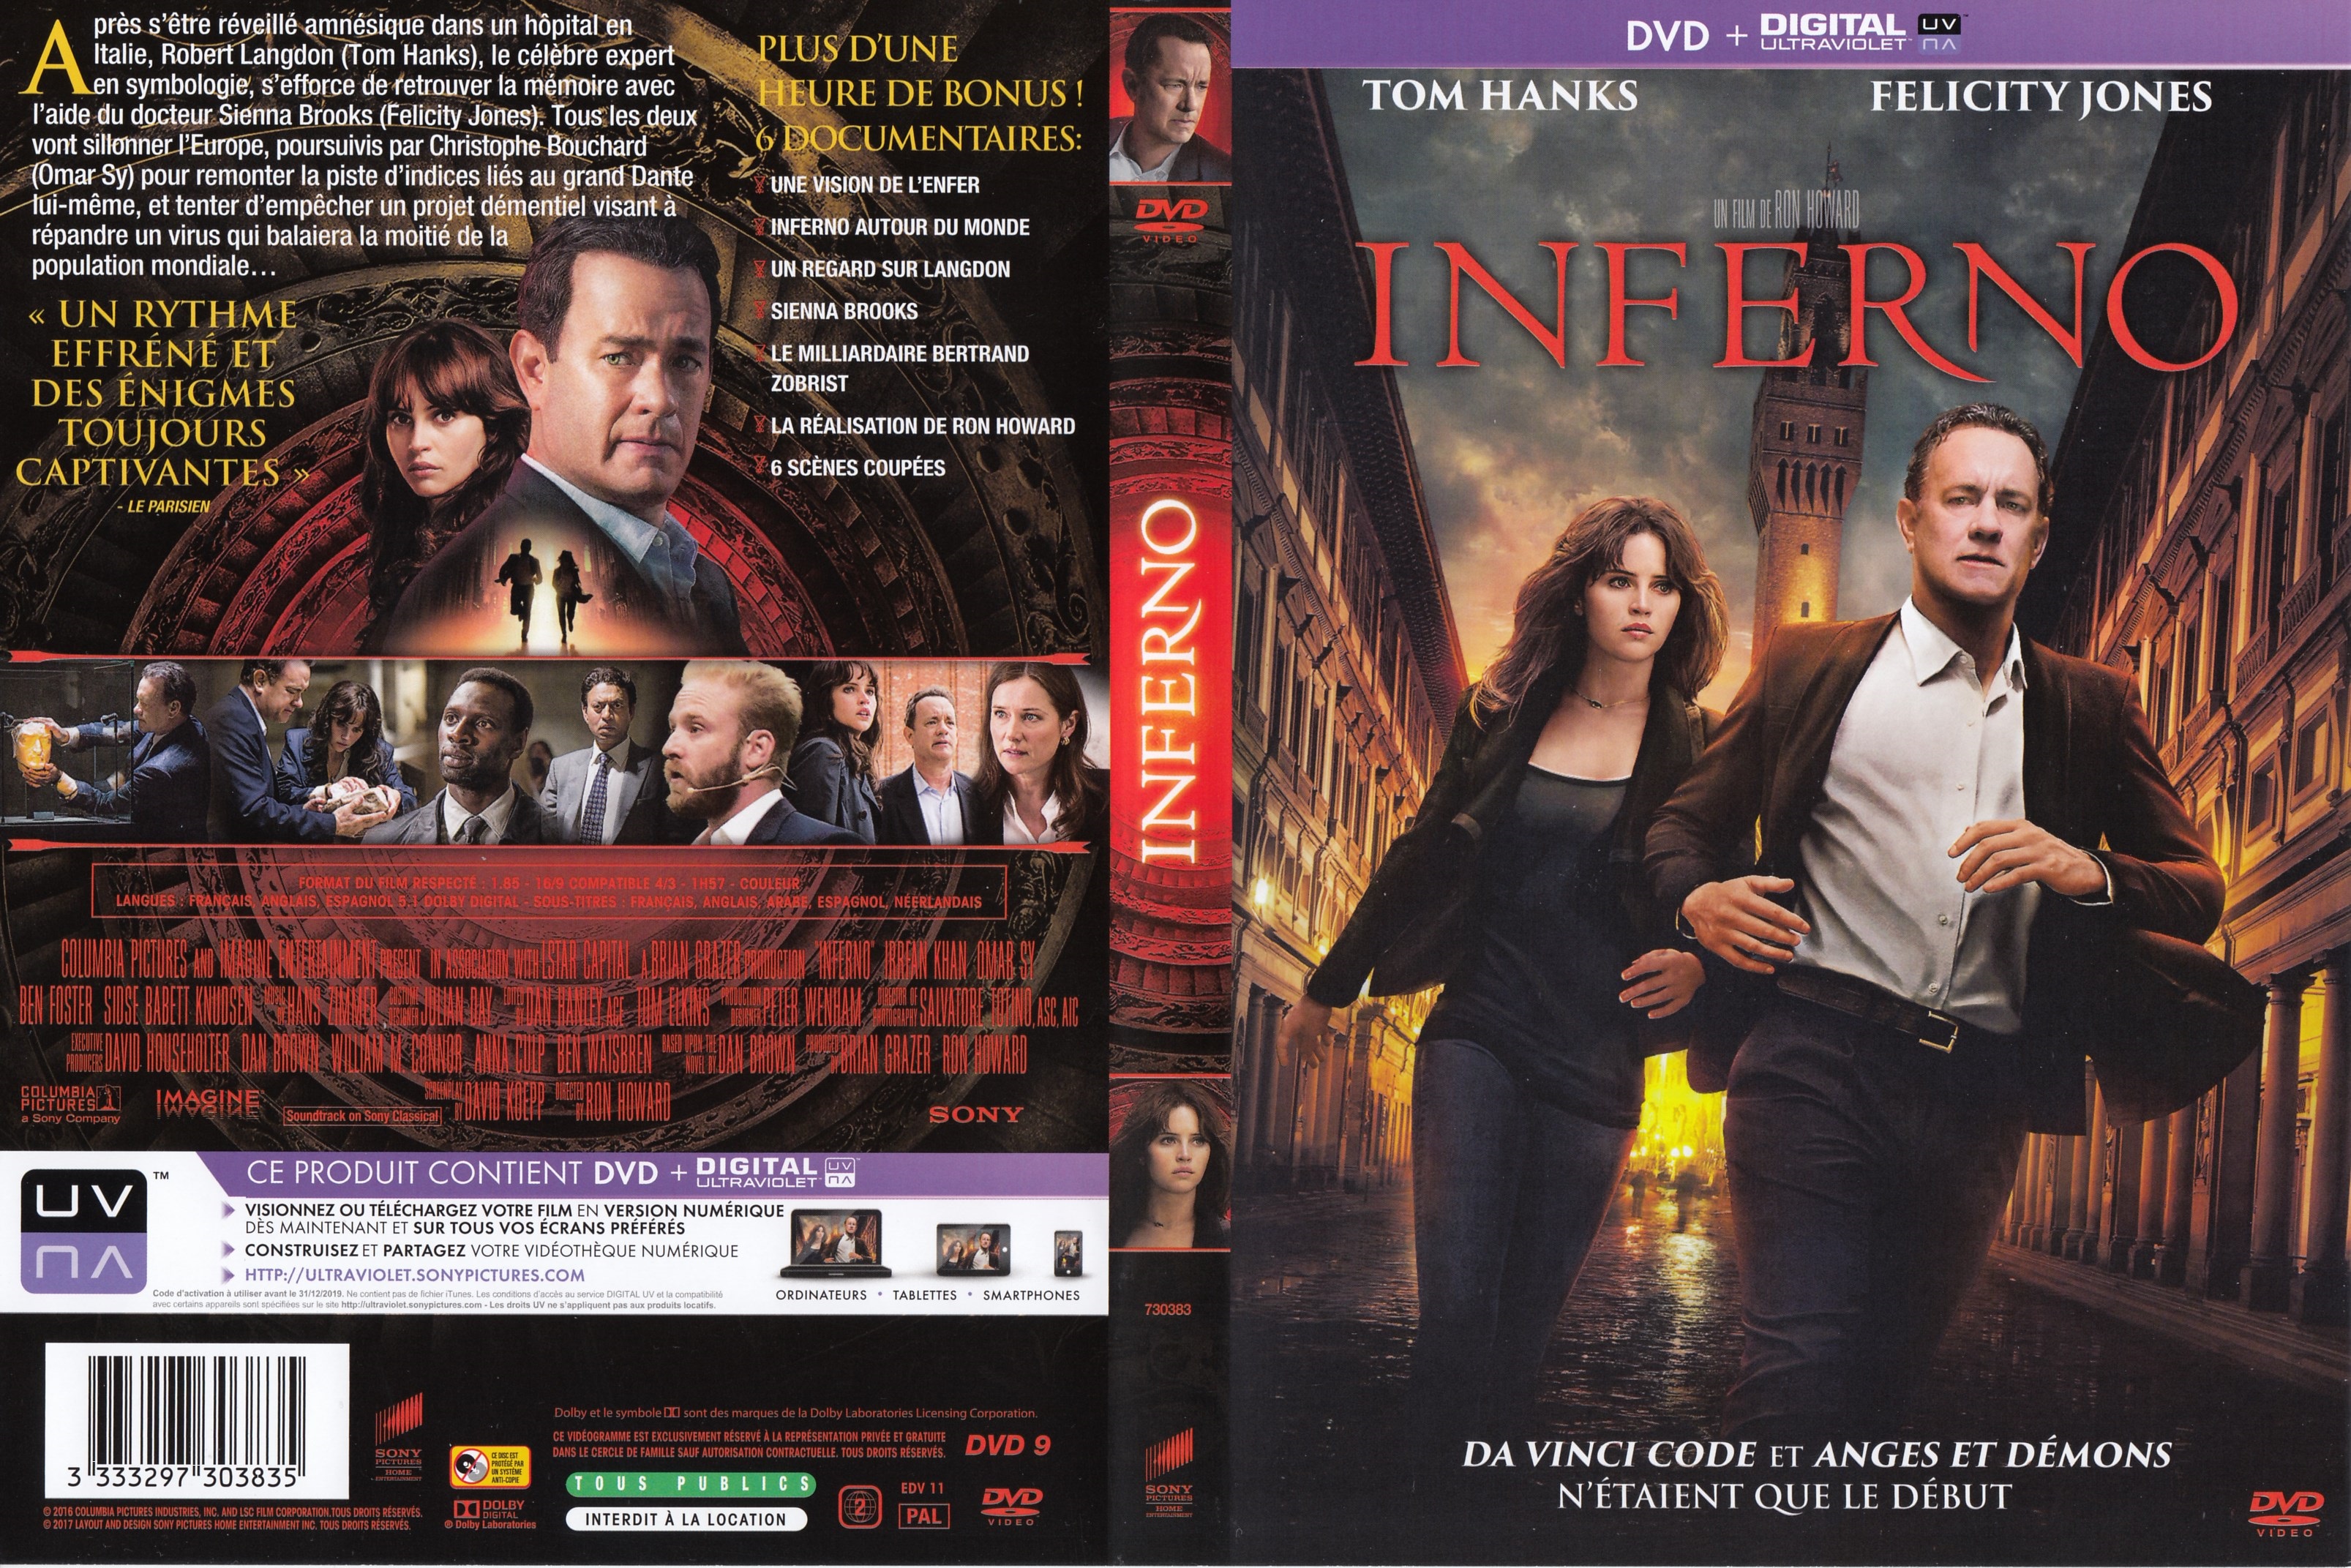 Jaquette DVD Inferno (2016)